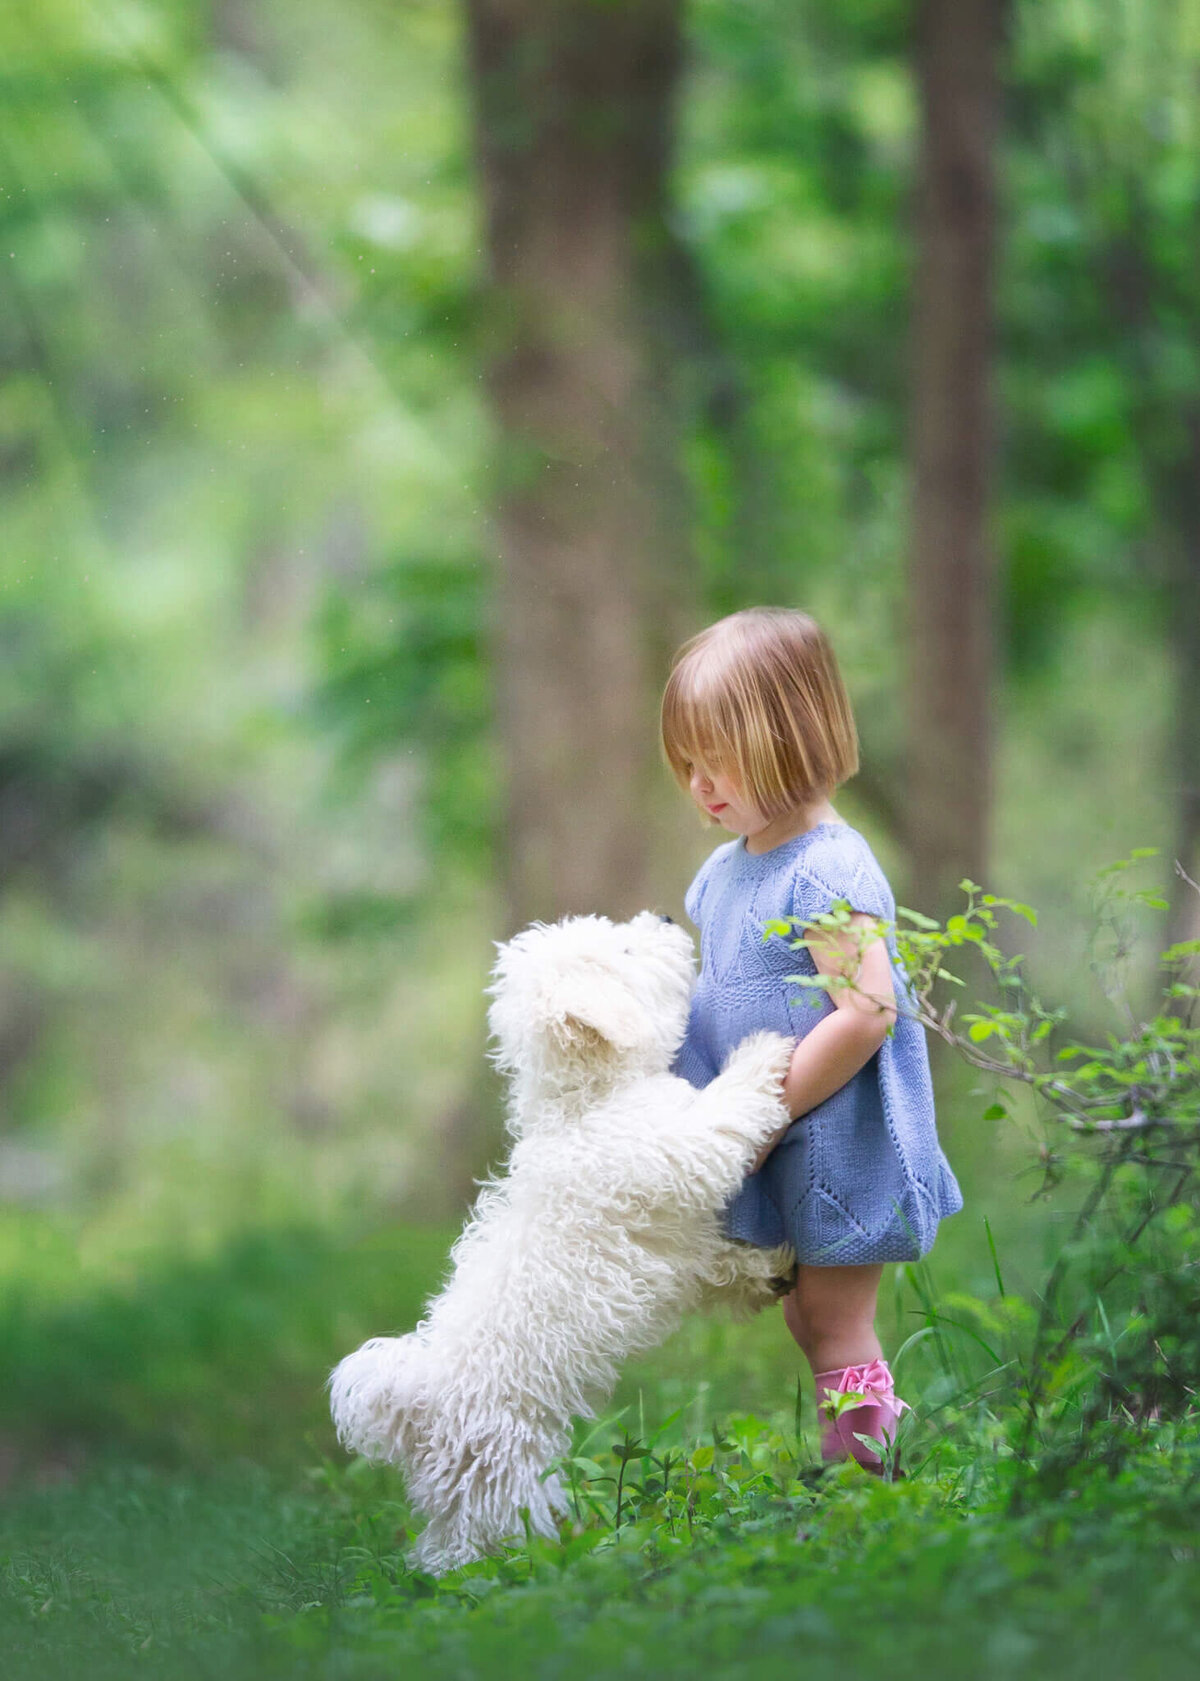 Little girl with her puppy in the park wearing a blue dress